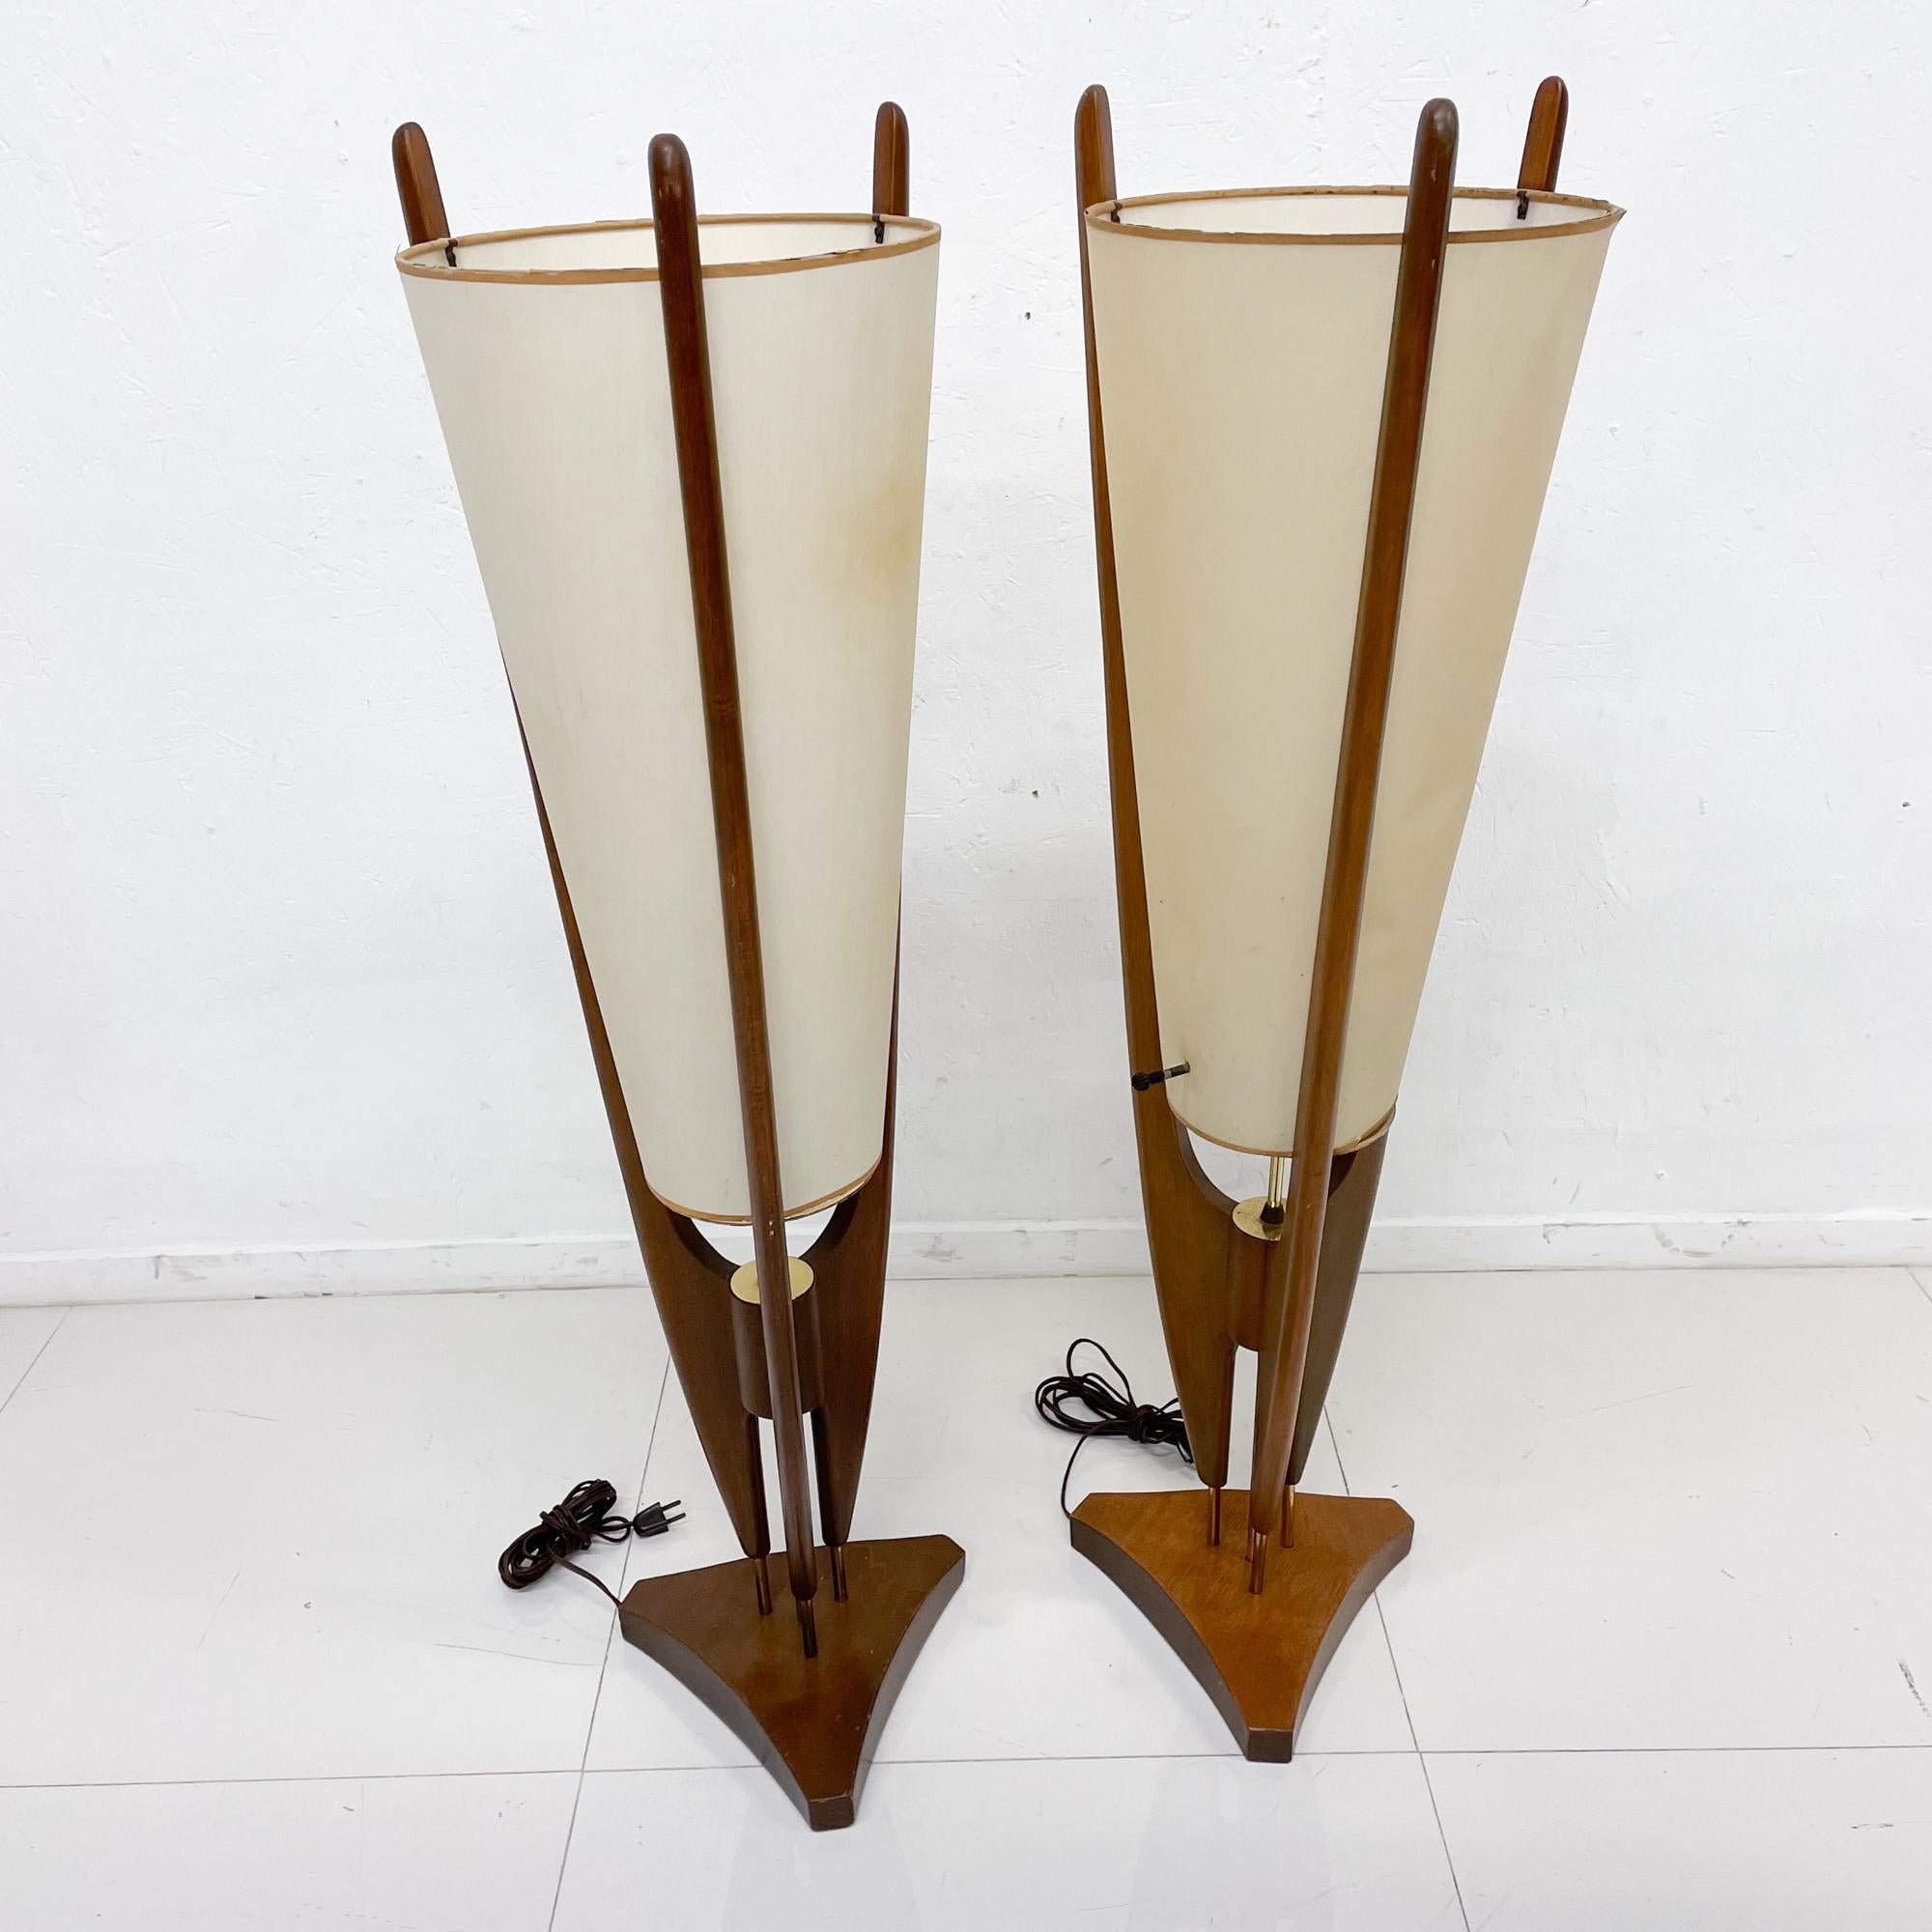 For your pleasure: Modeline floor or table lamps midcentury classic design 1960s Mod
Sculptural design attributed to the manner of Adrian Pearsall for Modeline Lamp CO
Appears as Teak Wood with a walnut finish. Brass Accent on the design. Shades